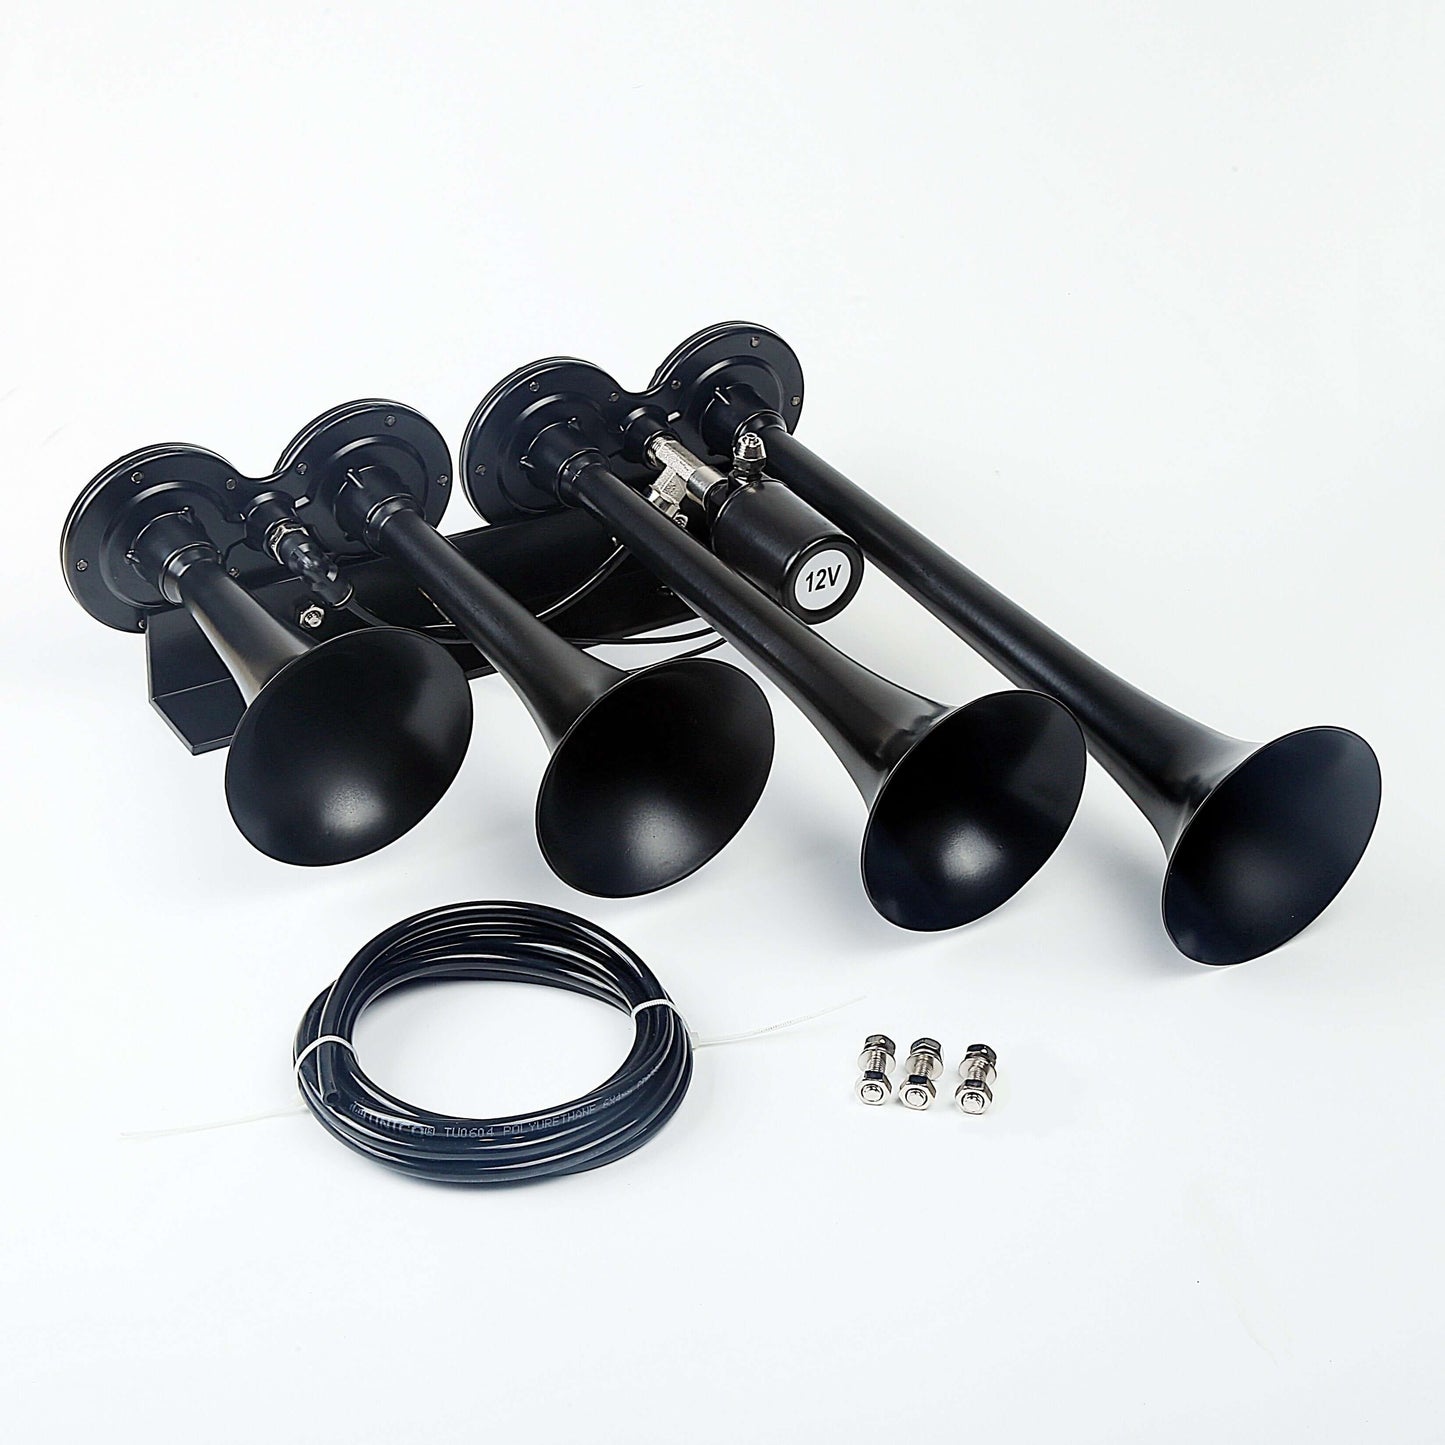 [UNIQUE OFFER] MasterBlaster 1.5Gal Horn Kit 4-Second Honk Time 